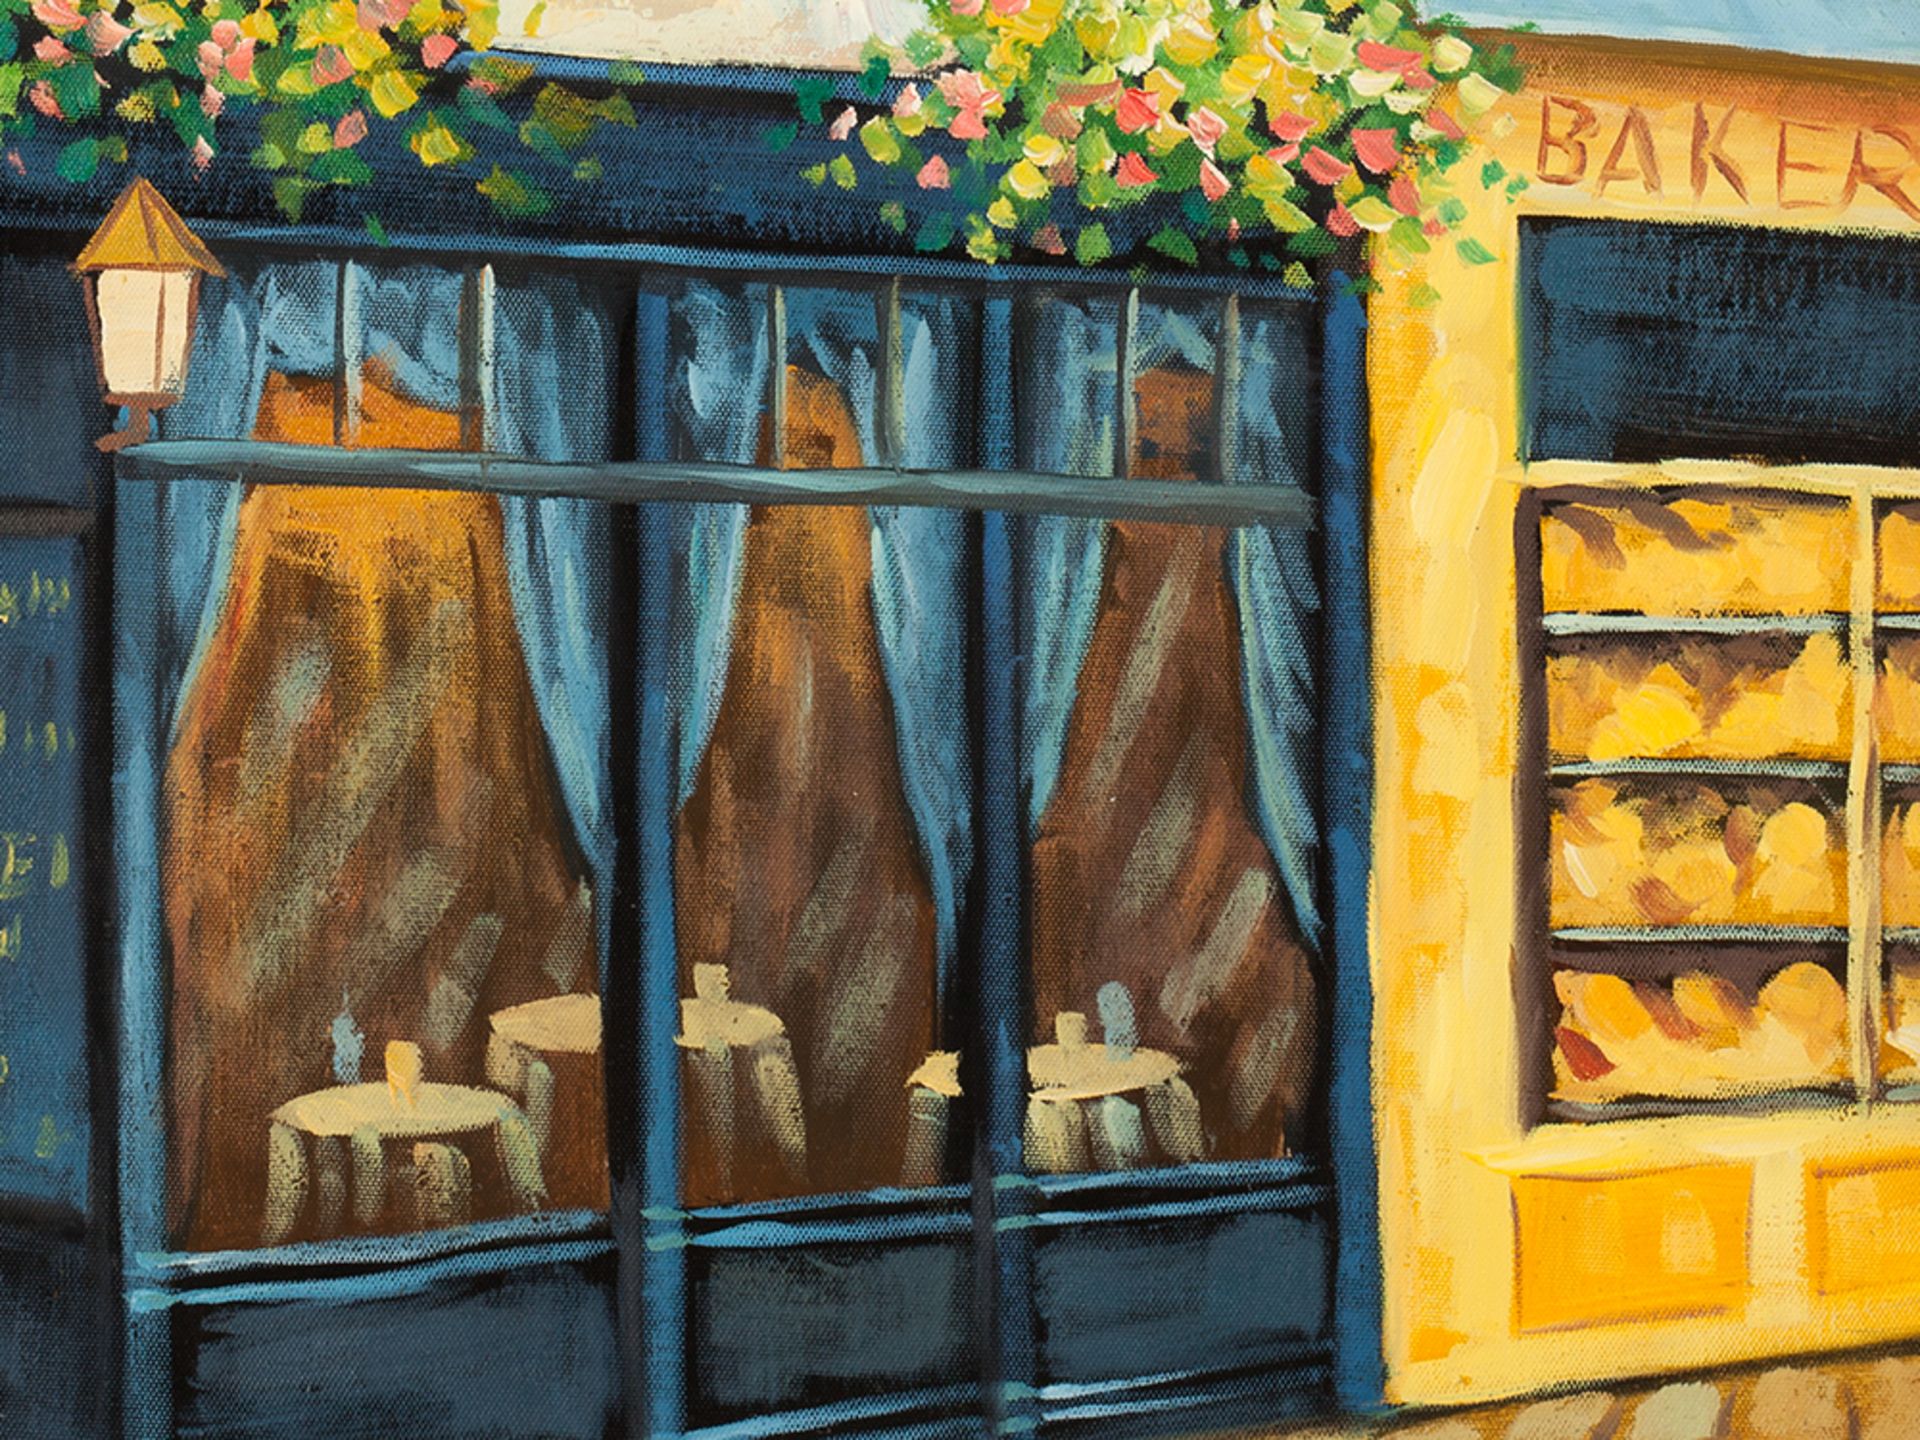 A. Wood, Oil Painting, Sidewalk Cafe, England, c. 2000 - Image 6 of 7